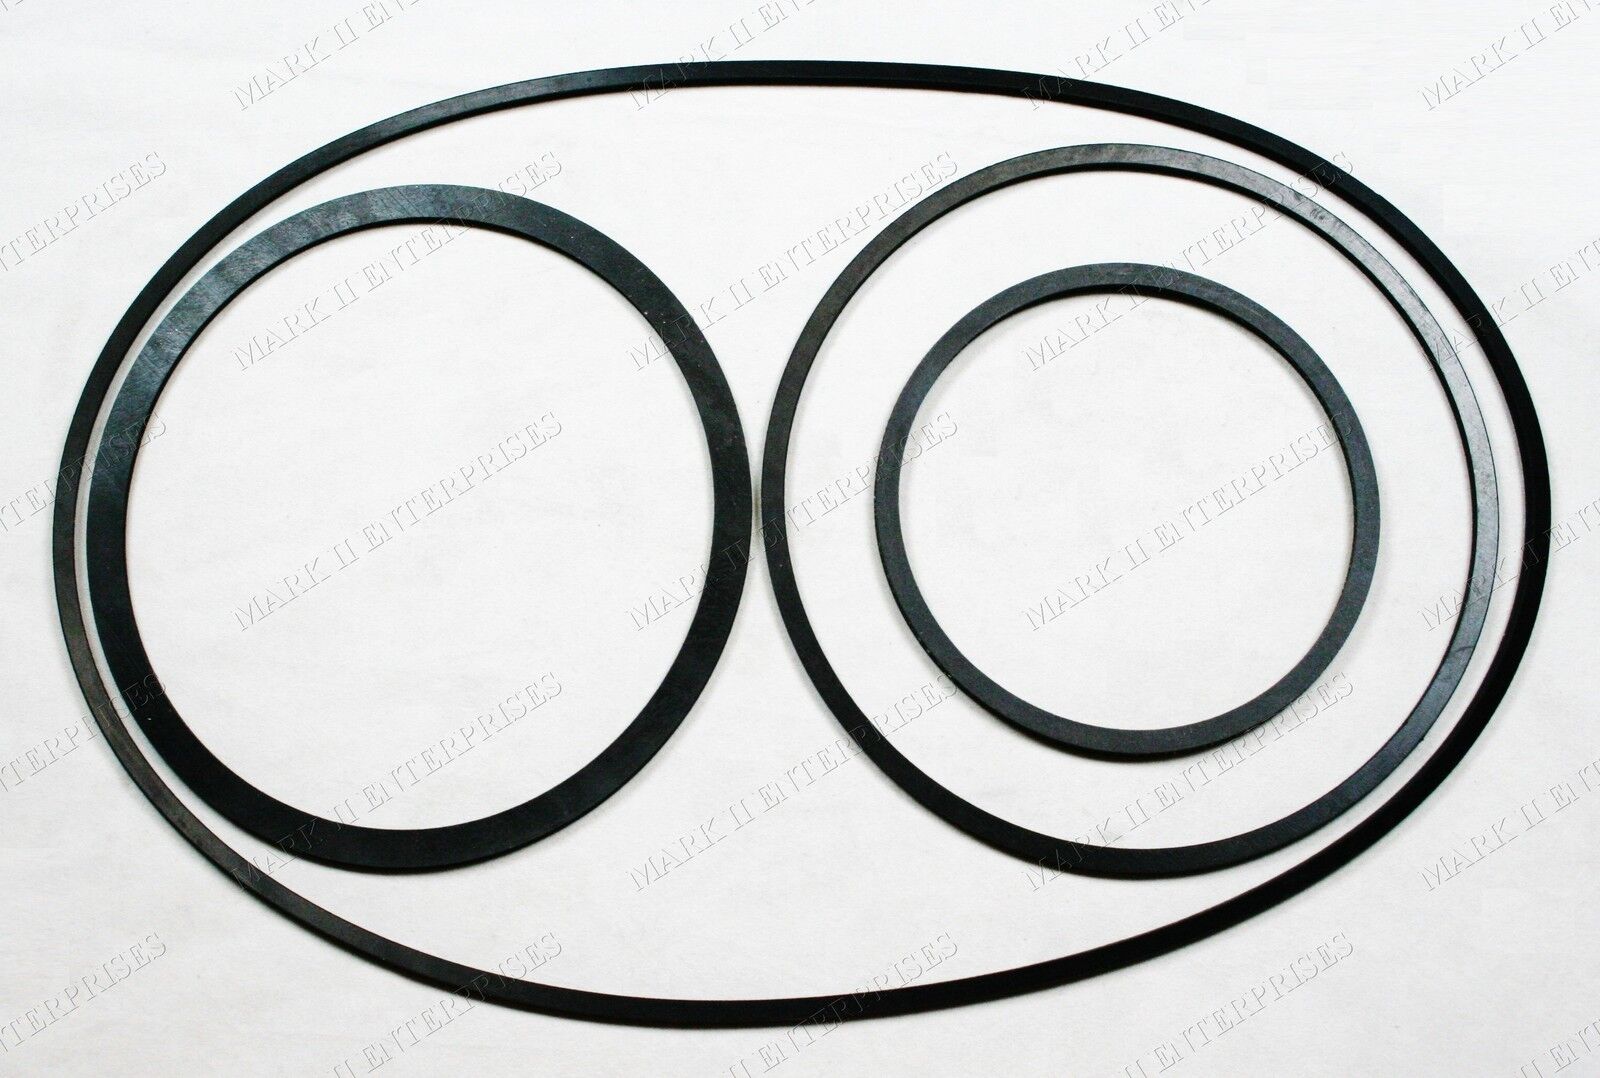 1956-57 CONTINENTAL MARK II MKII AIR FILTER CLEANER RUBBER SEAL 4-PIECE KIT